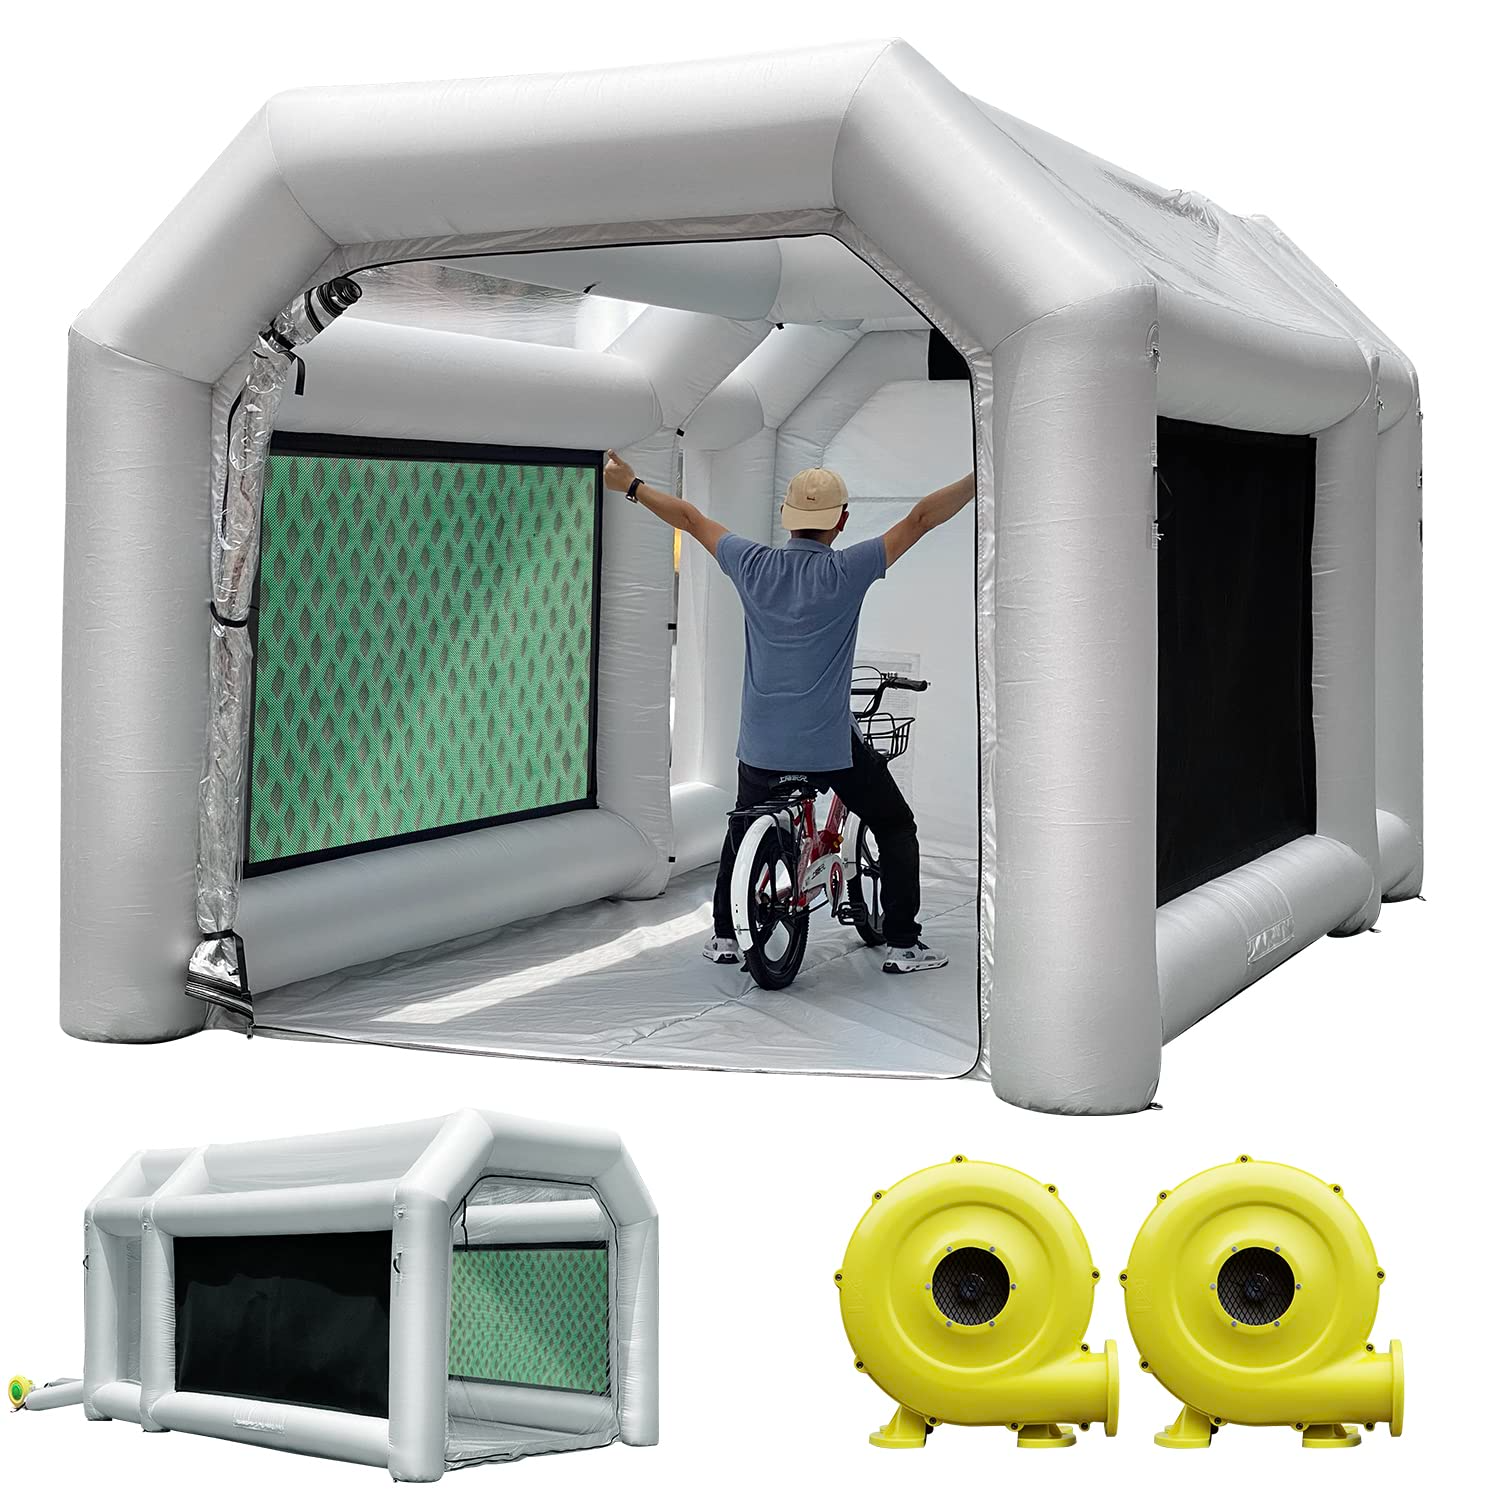 WARSUN 14x10x8.5Ft Inflatable Paint Booth with Oversized&Double Air Filters System Inflatable Spray Booth with 480W+240W Blowers Portable Spray Paint Booth Tent for Auto Parts